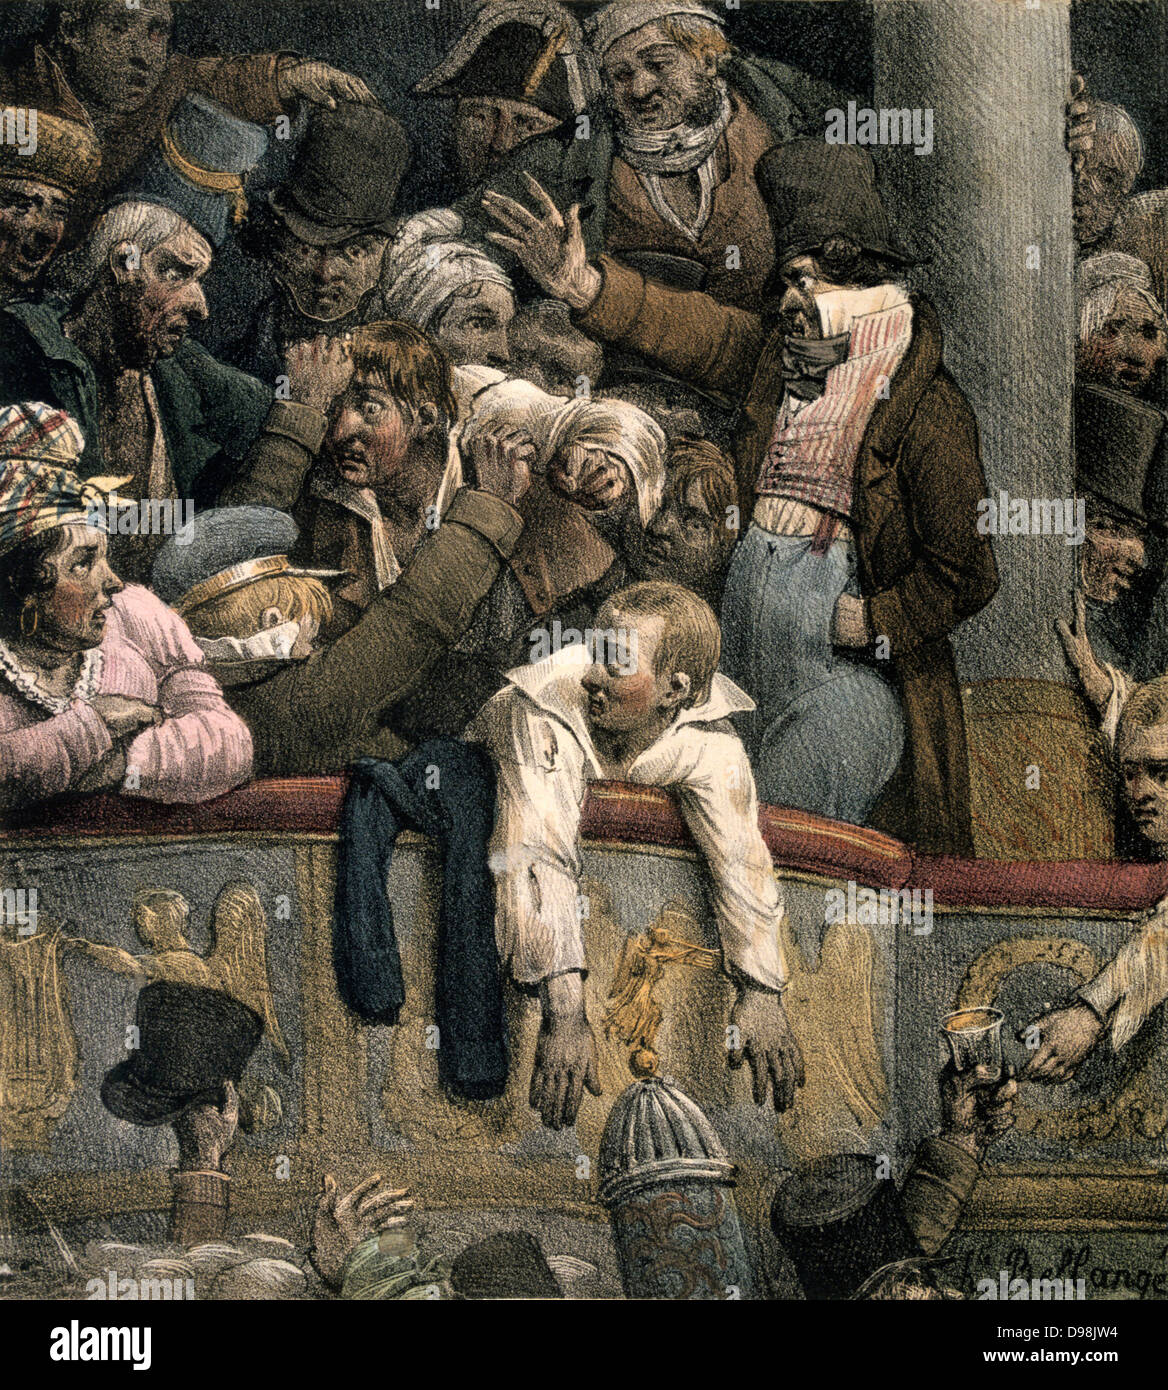 Box at the Theatre' by Hippolyte Bellange (1800-1866) French painter. Chaotic scene with overcrowded Box with audience fighting . Bottom left a top hat is being handed back. Bottom right a drink is being handed up from the promenade level. Stock Photo